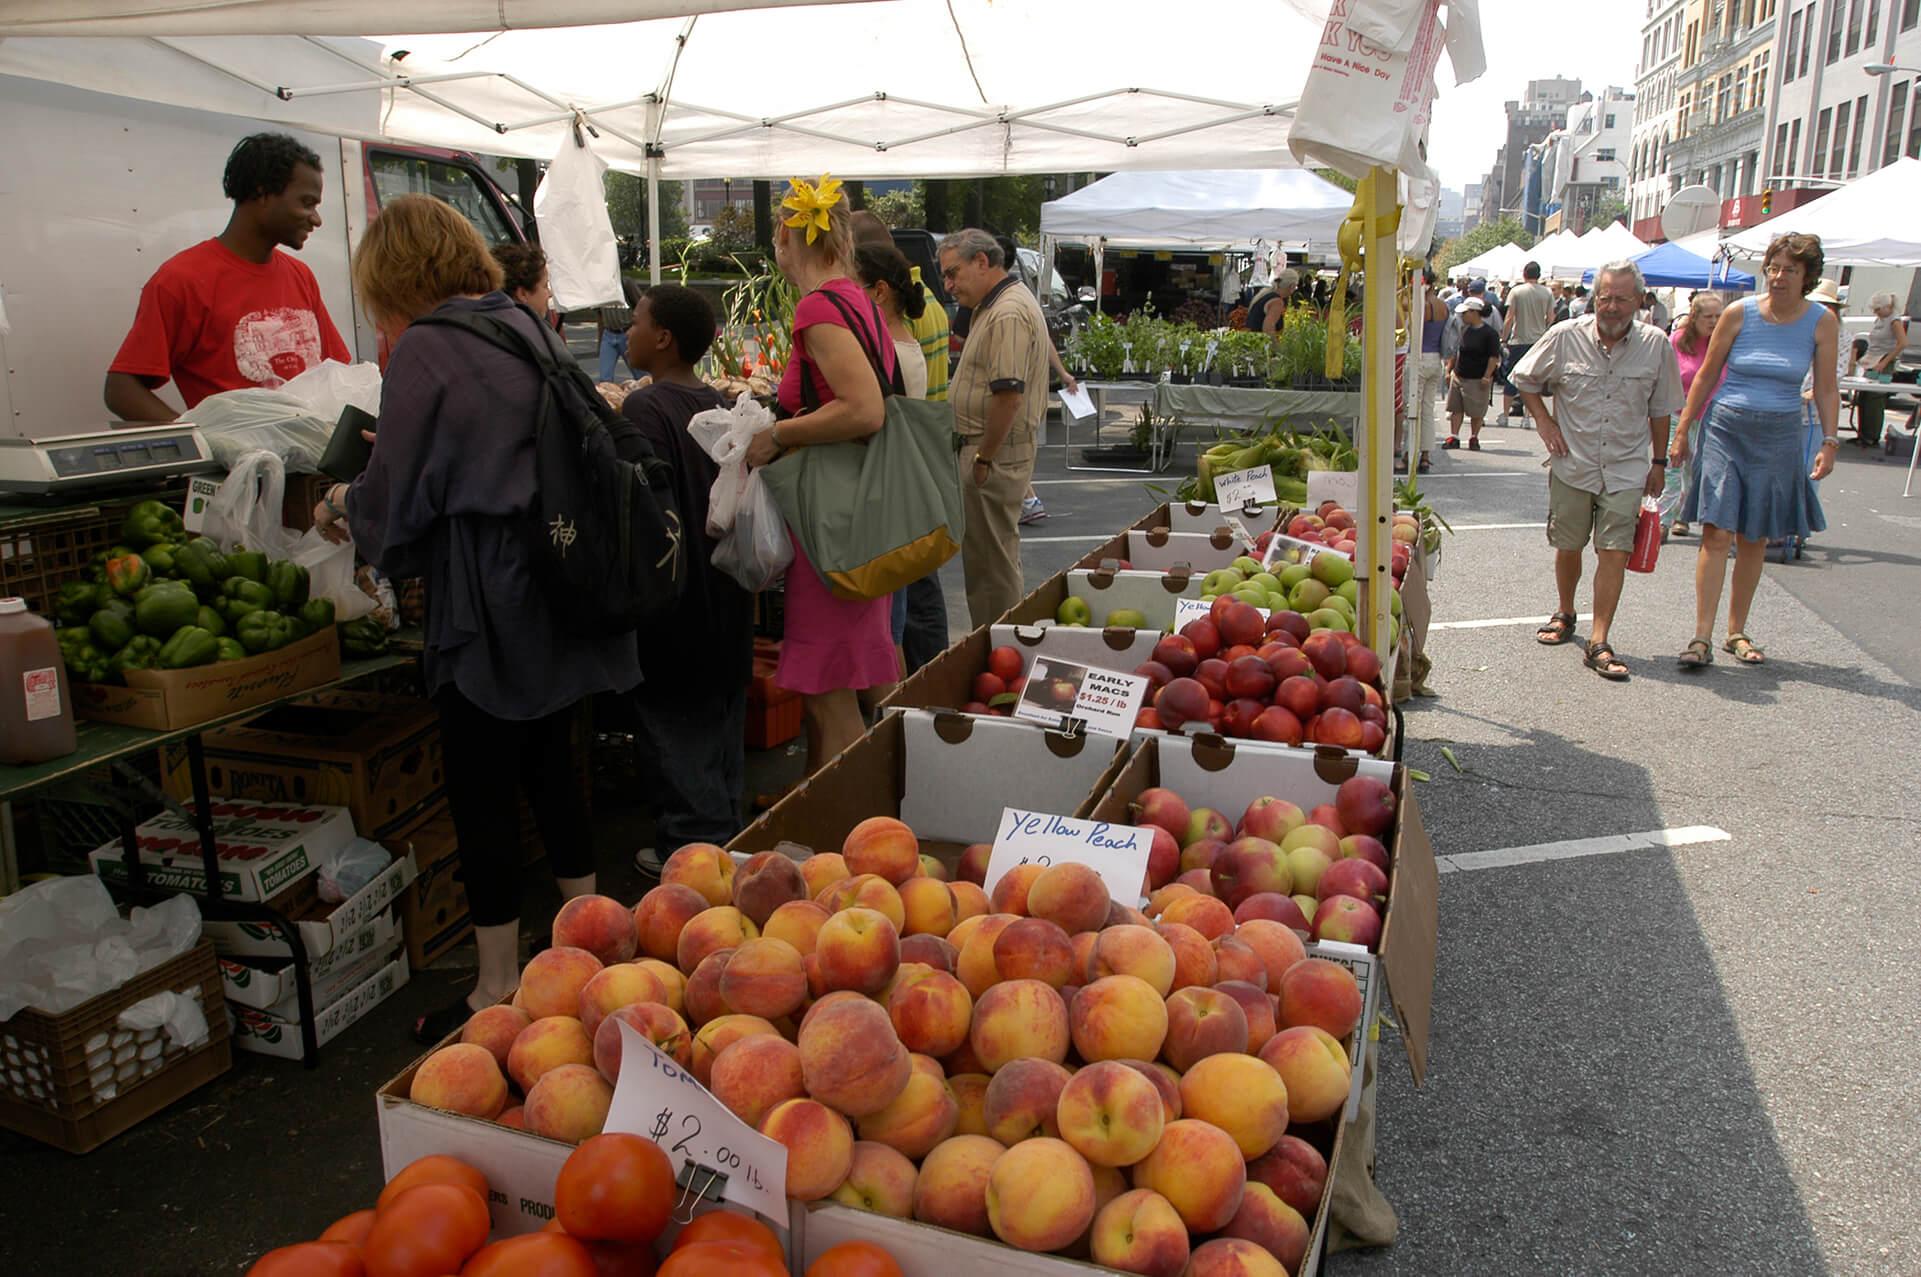 Fruit being sold at a farmers market with people paying for their produce under one of the white tents